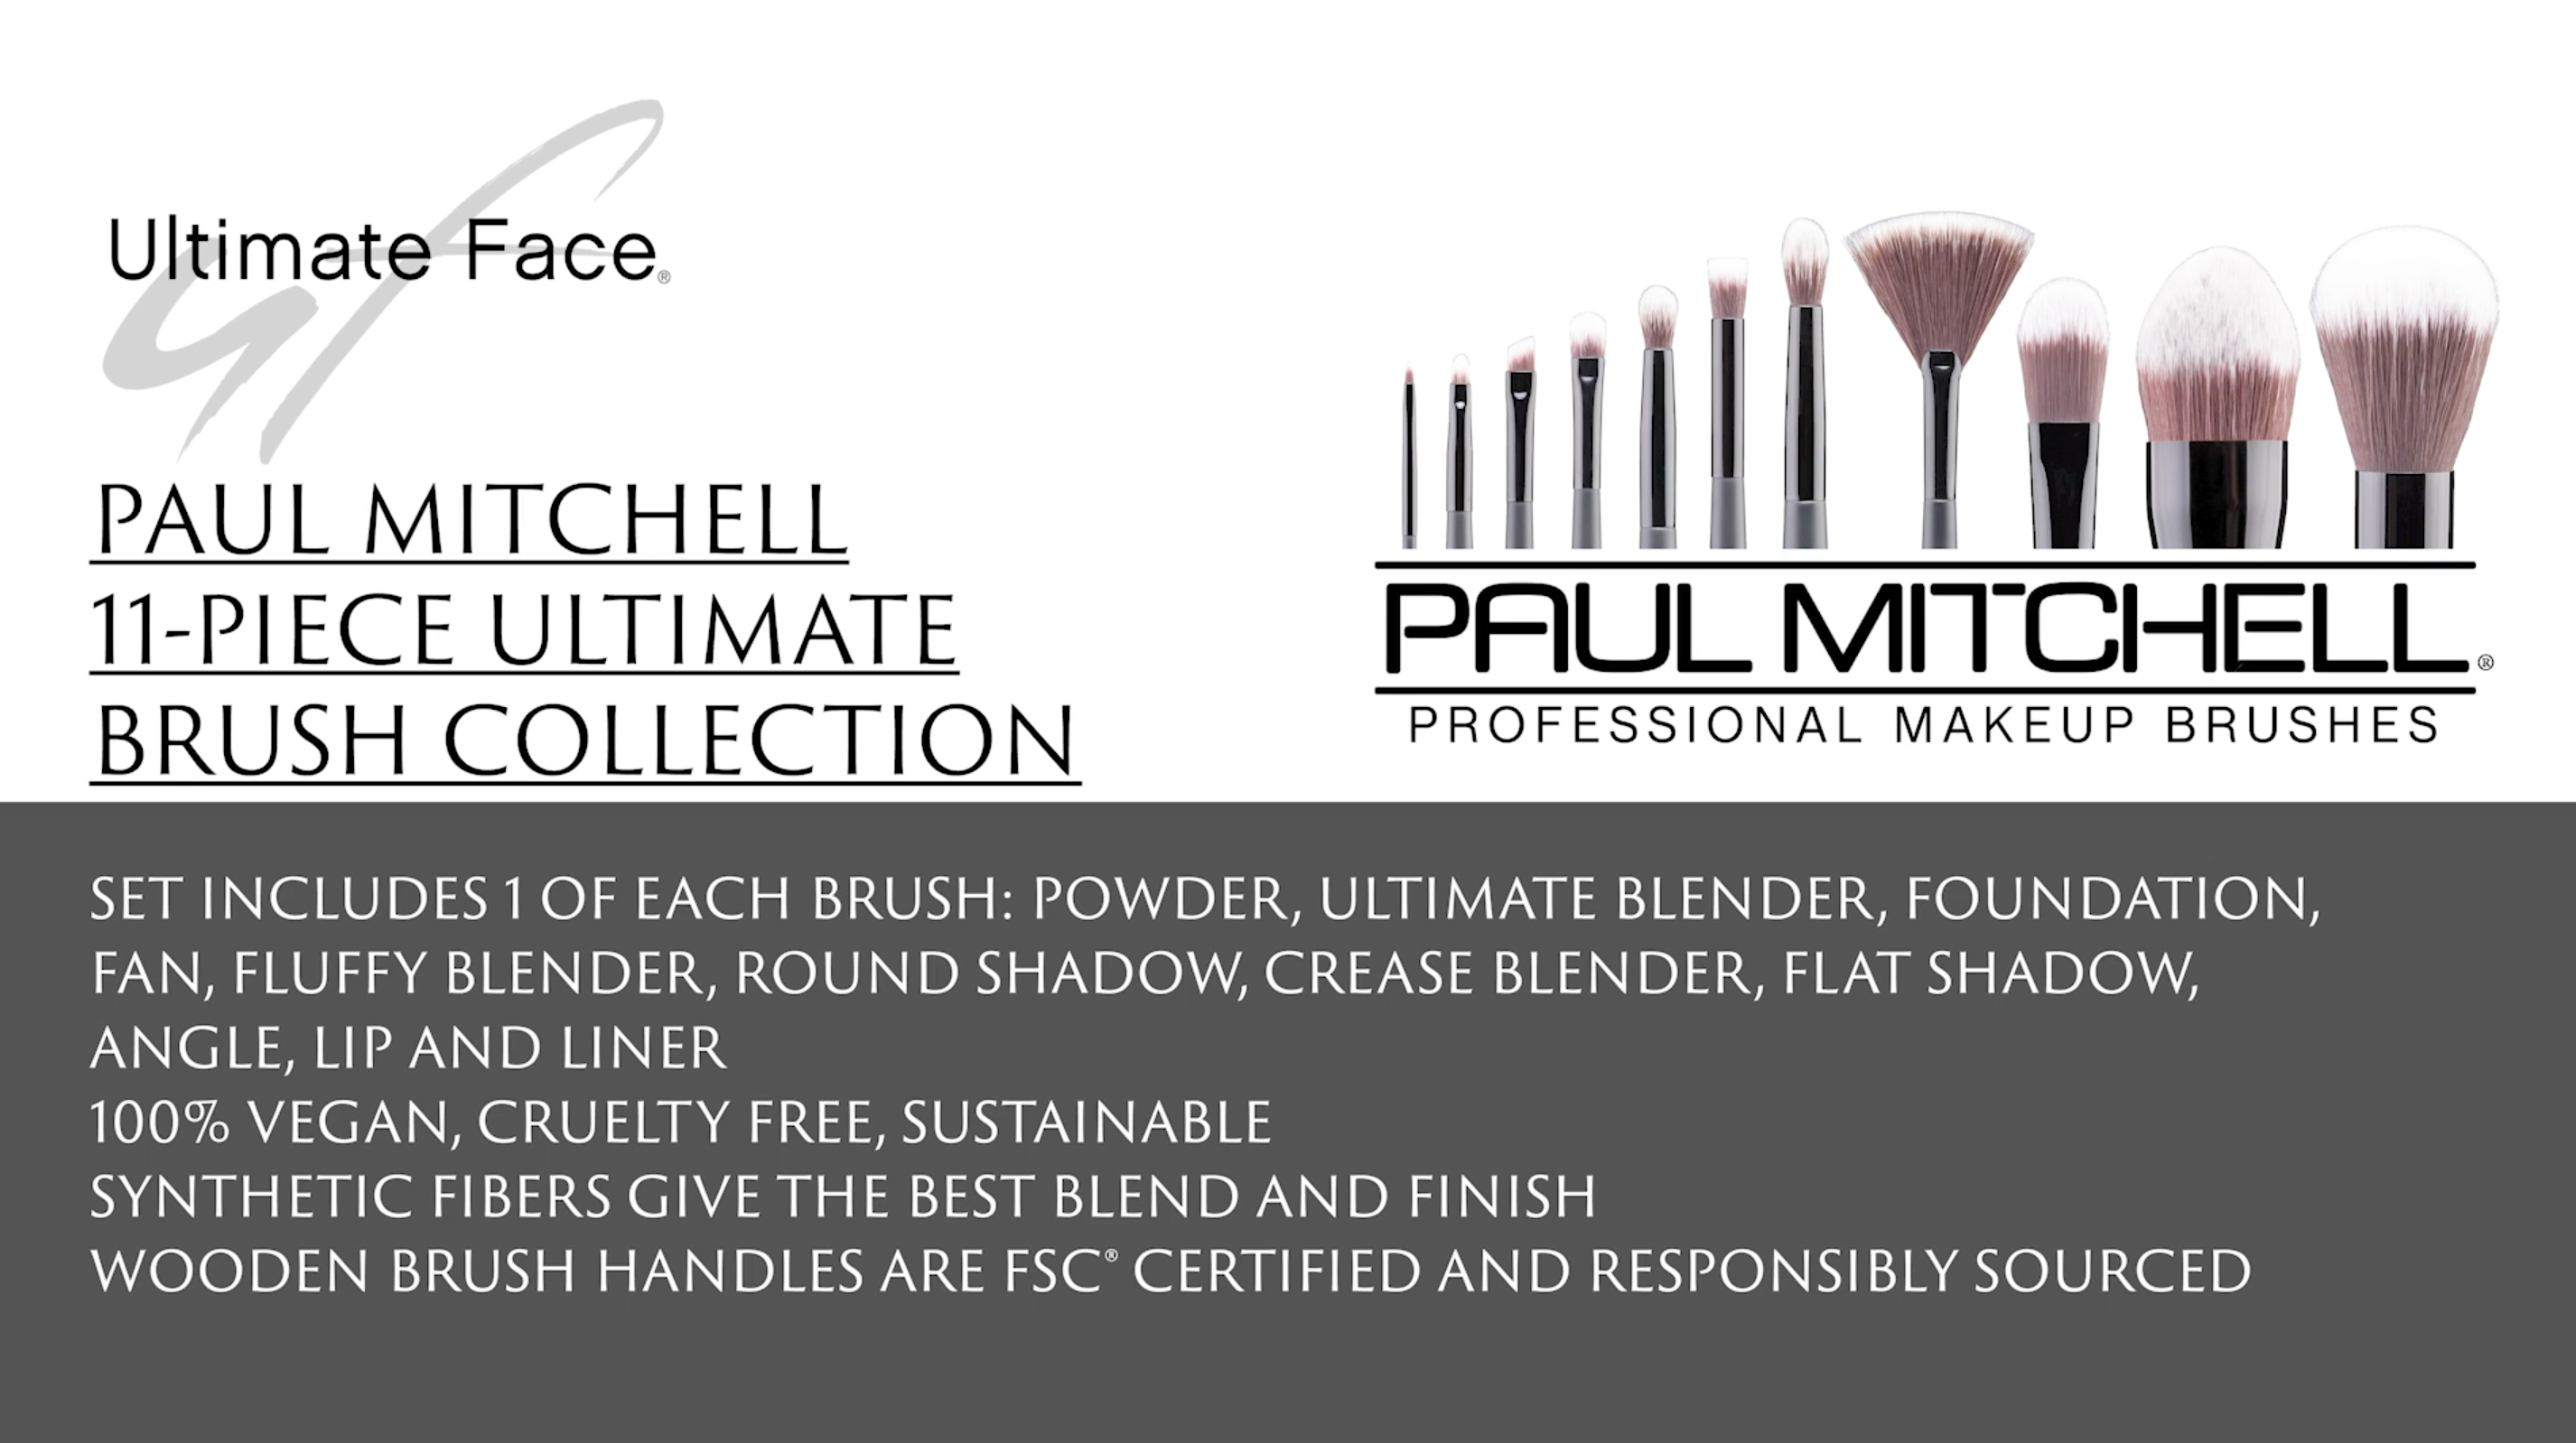 Paul Mitchell Ultimate Brush Collection